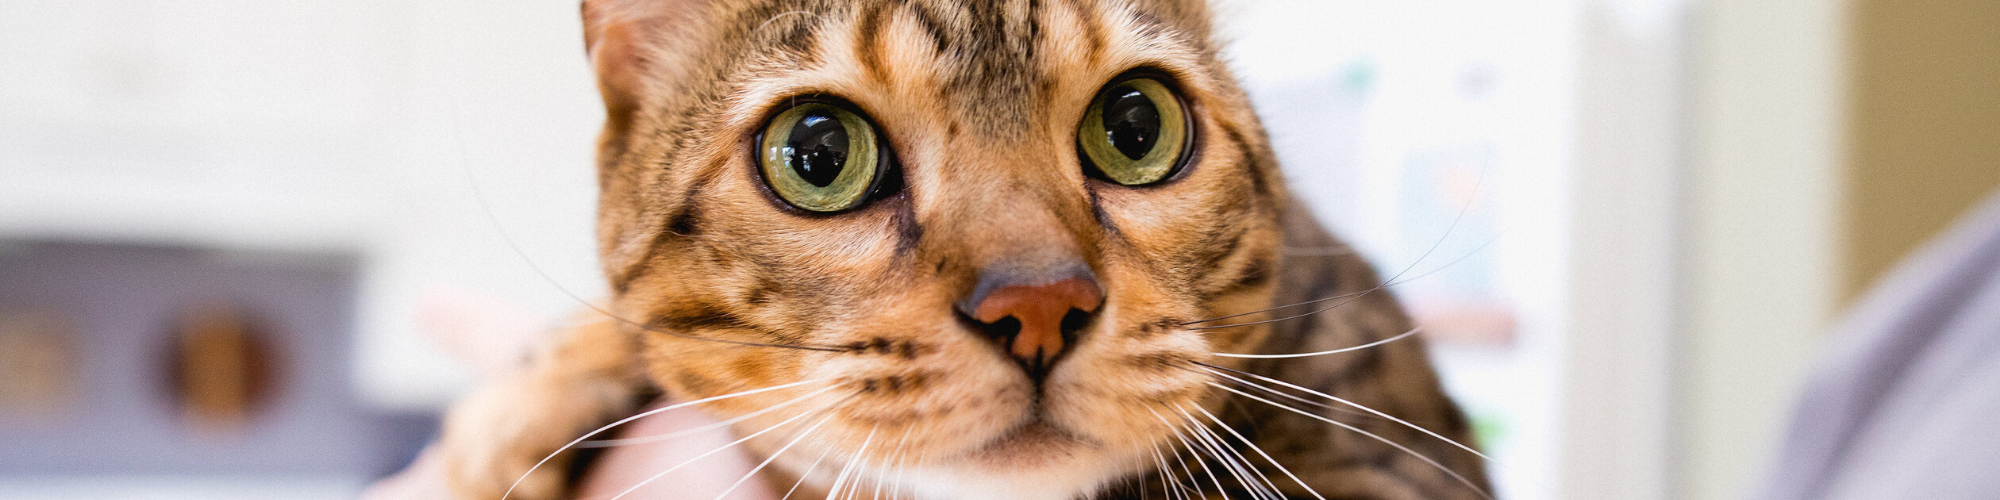 How to Control and Treat Hairballs in Cats